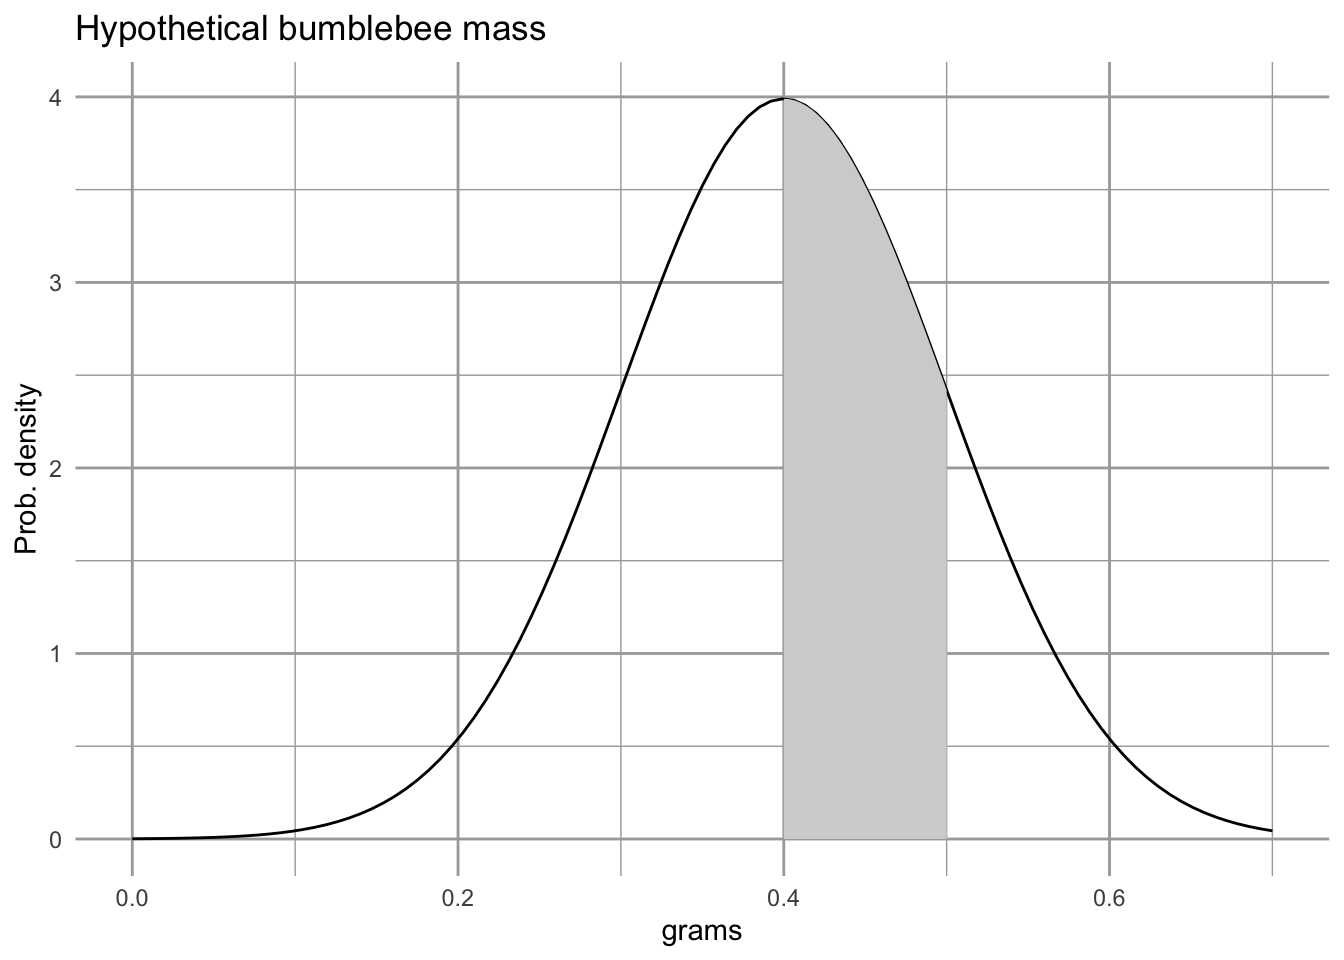 With continuous variables, probabilities are calculated by calculating the area under the curve for the region of interest. According to this probability density, the probability of finding bee that weighs between 0.4 and 0.5 g is represented by the shaded area, or about 34%.